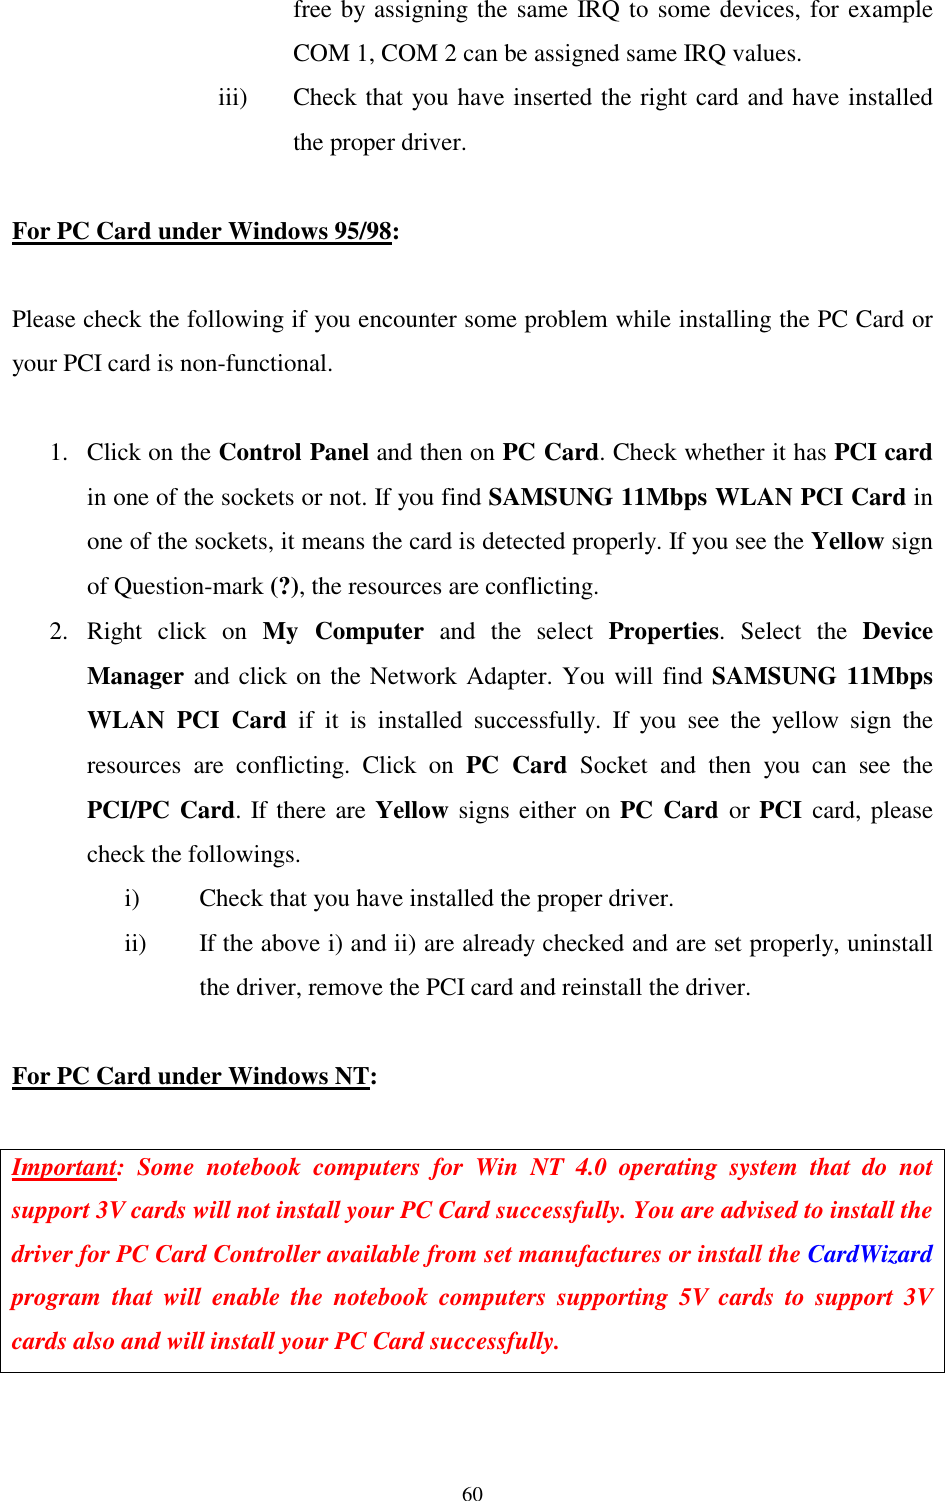  60 free by assigning the same IRQ to some devices, for example COM 1, COM 2 can be assigned same IRQ values. iii)  Check that you have inserted the right card and have installed the proper driver.  For PC Card under Windows 95/98:  Please check the following if you encounter some problem while installing the PC Card or your PCI card is non-functional.  1.  Click on the Control Panel and then on PC Card. Check whether it has PCI card in one of the sockets or not. If you find SAMSUNG 11Mbps WLAN PCI Card in one of the sockets, it means the card is detected properly. If you see the Yellow sign of Question-mark (?), the resources are conflicting.  2. Right click on My Computer and the select Properties. Select the Device Manager and click on the Network Adapter. You will find SAMSUNG 11Mbps WLAN PCI Card if it is installed successfully. If you see the yellow sign the resources are conflicting. Click on PC Card Socket and then you can see the PCI/PC Card. If there are Yellow signs either on PC Card or PCI  card, please check the followings. i)  Check that you have installed the proper driver. ii)  If the above i) and ii) are already checked and are set properly, uninstall the driver, remove the PCI card and reinstall the driver.  For PC Card under Windows NT:  Important: Some notebook computers for Win NT 4.0 operating system that do not support 3V cards will not install your PC Card successfully. You are advised to install the driver for PC Card Controller available from set manufactures or install the CardWizard program that will enable the notebook computers supporting 5V cards to support 3V cards also and will install your PC Card successfully.   